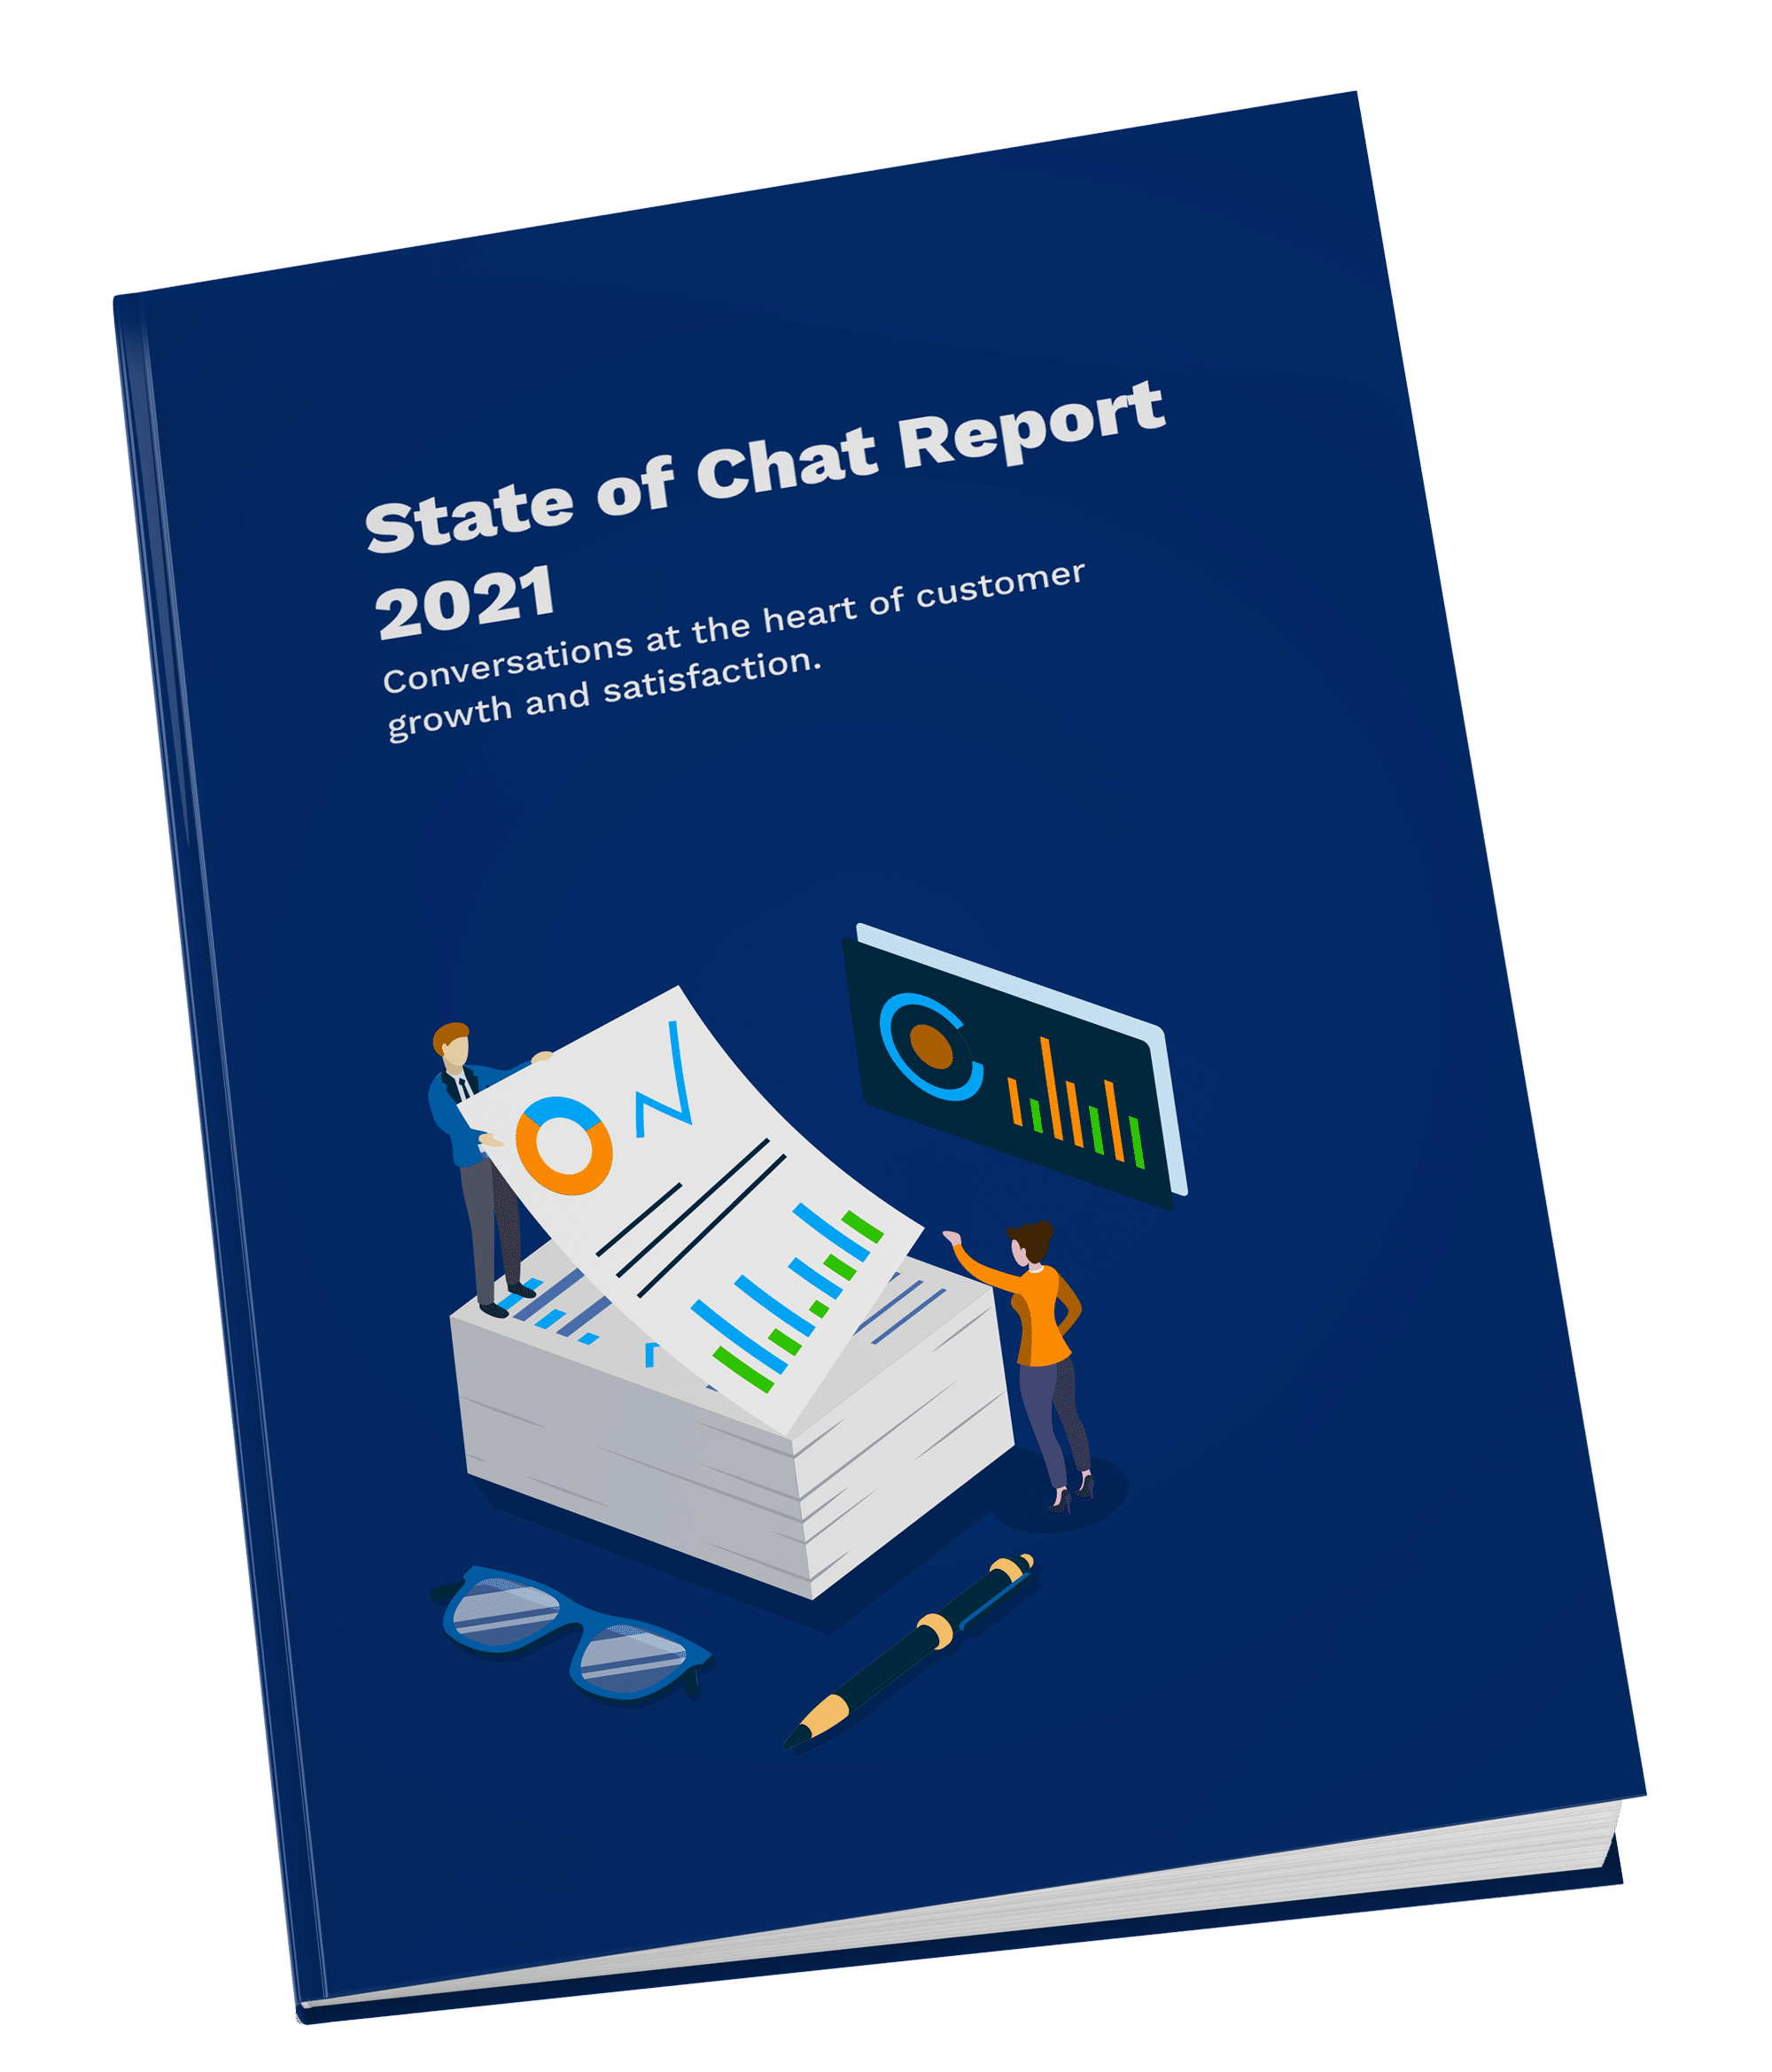 State of Chat Report 2021